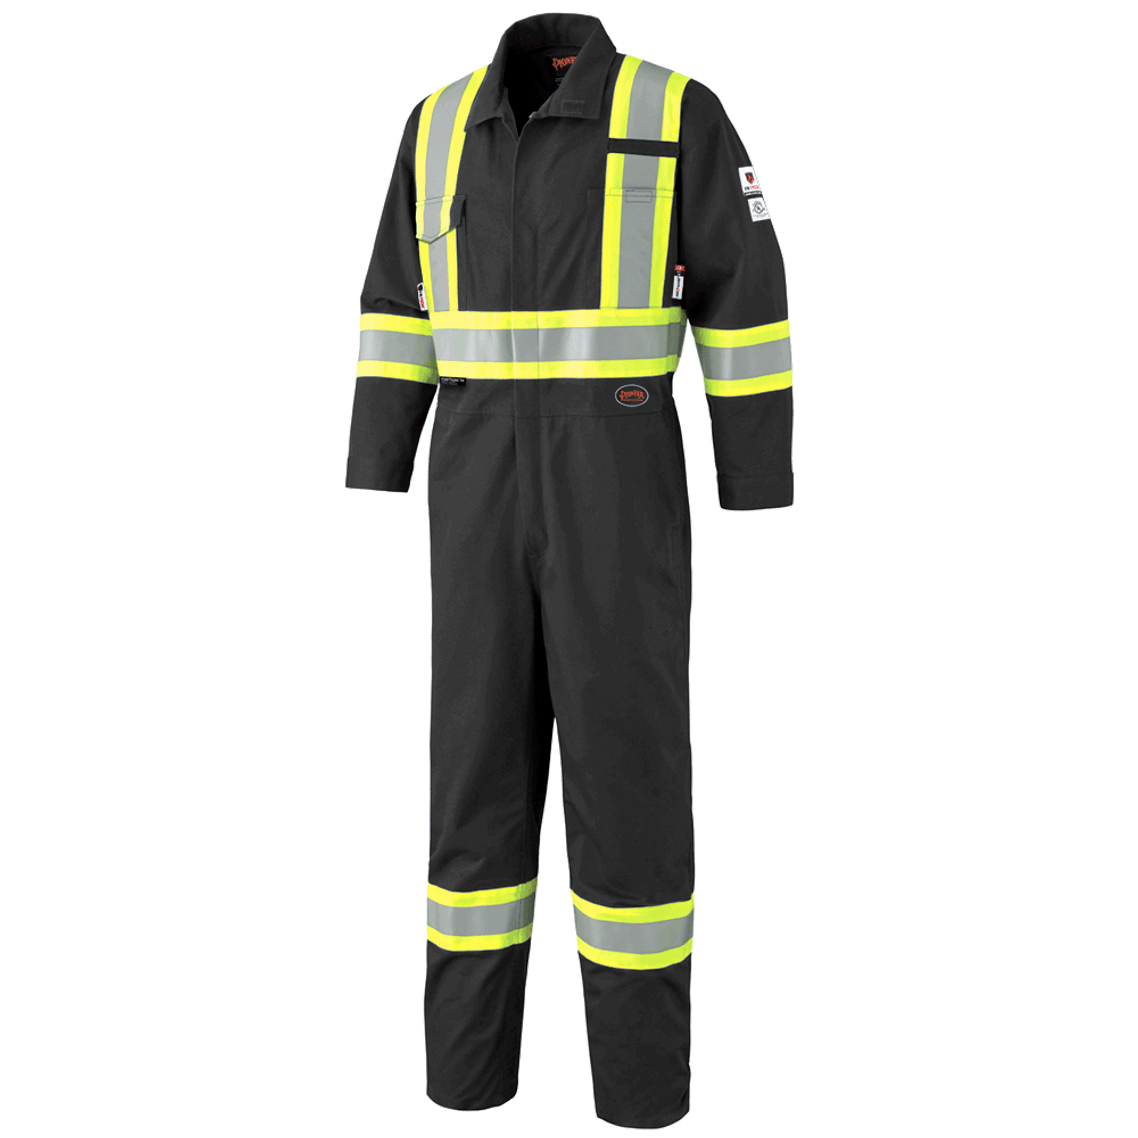 7702BKT FR-TECH® Flame Resistant/ARC Rated Safety Coverall - Black (Tall) | Safetywear.ca